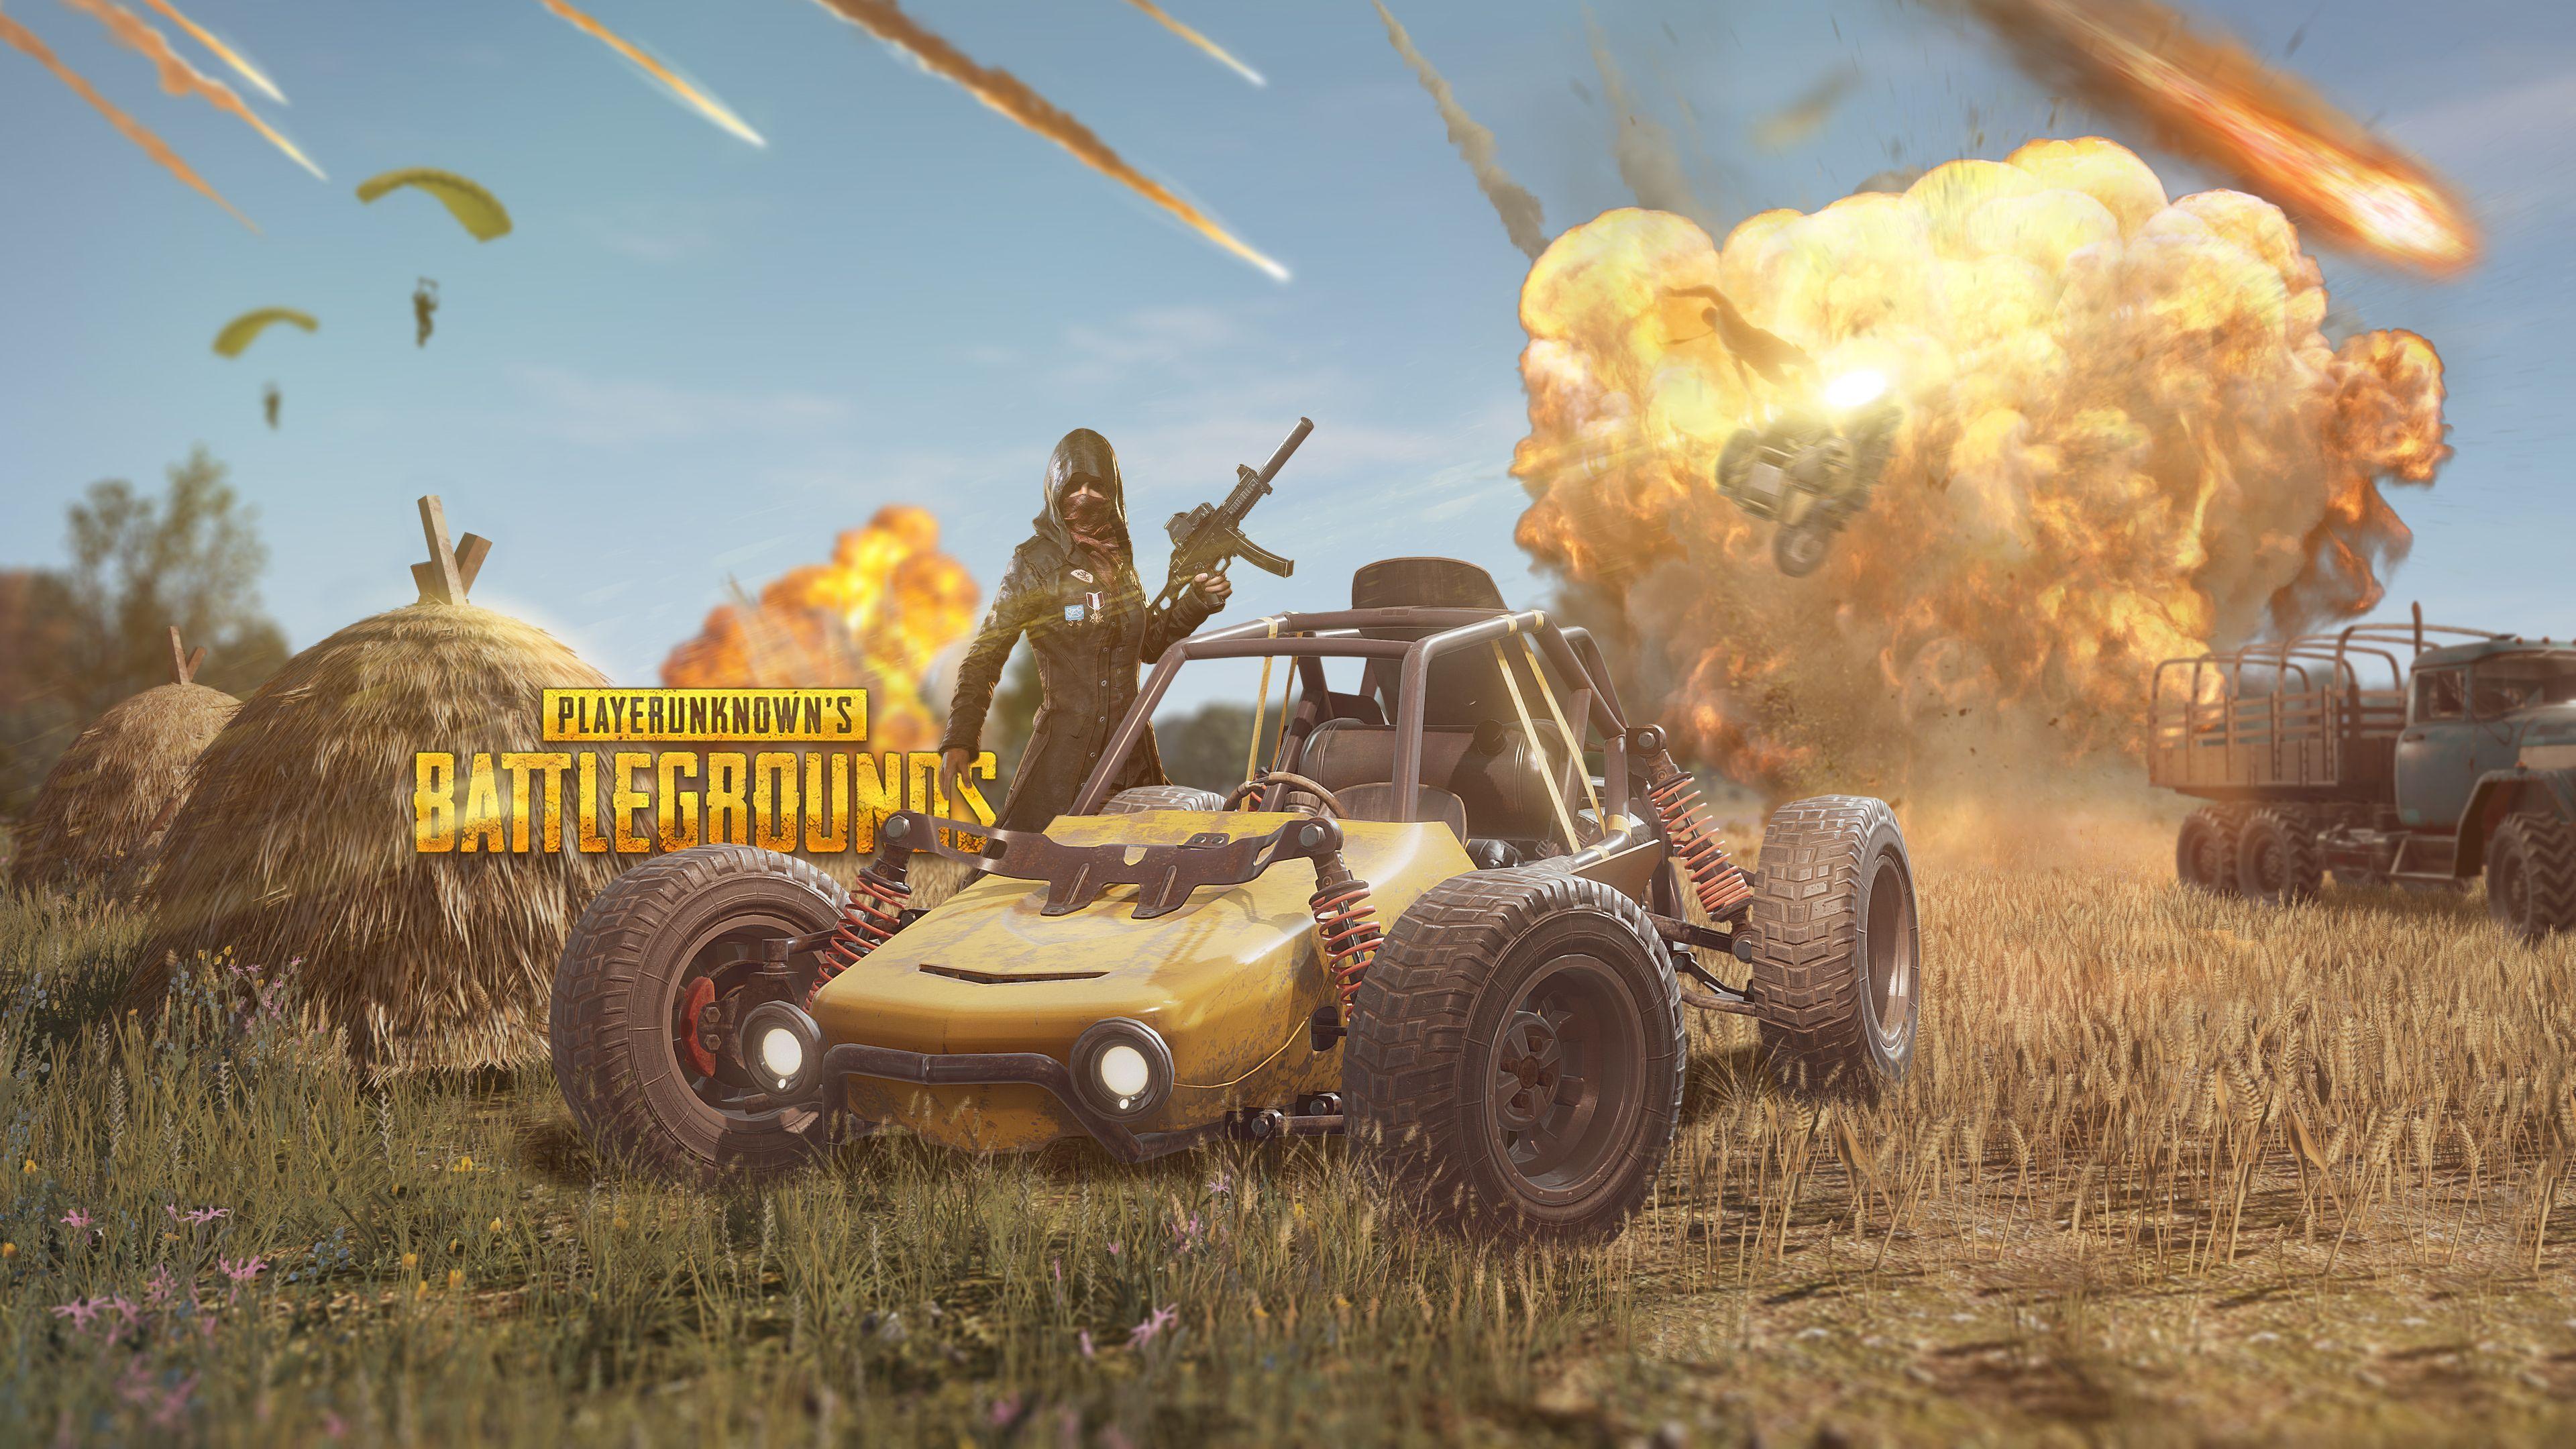 31+ PUBG 4K Wallpapers: HD, 4K, 5K for PC and Mobile | Download free images  for iPhone, Android